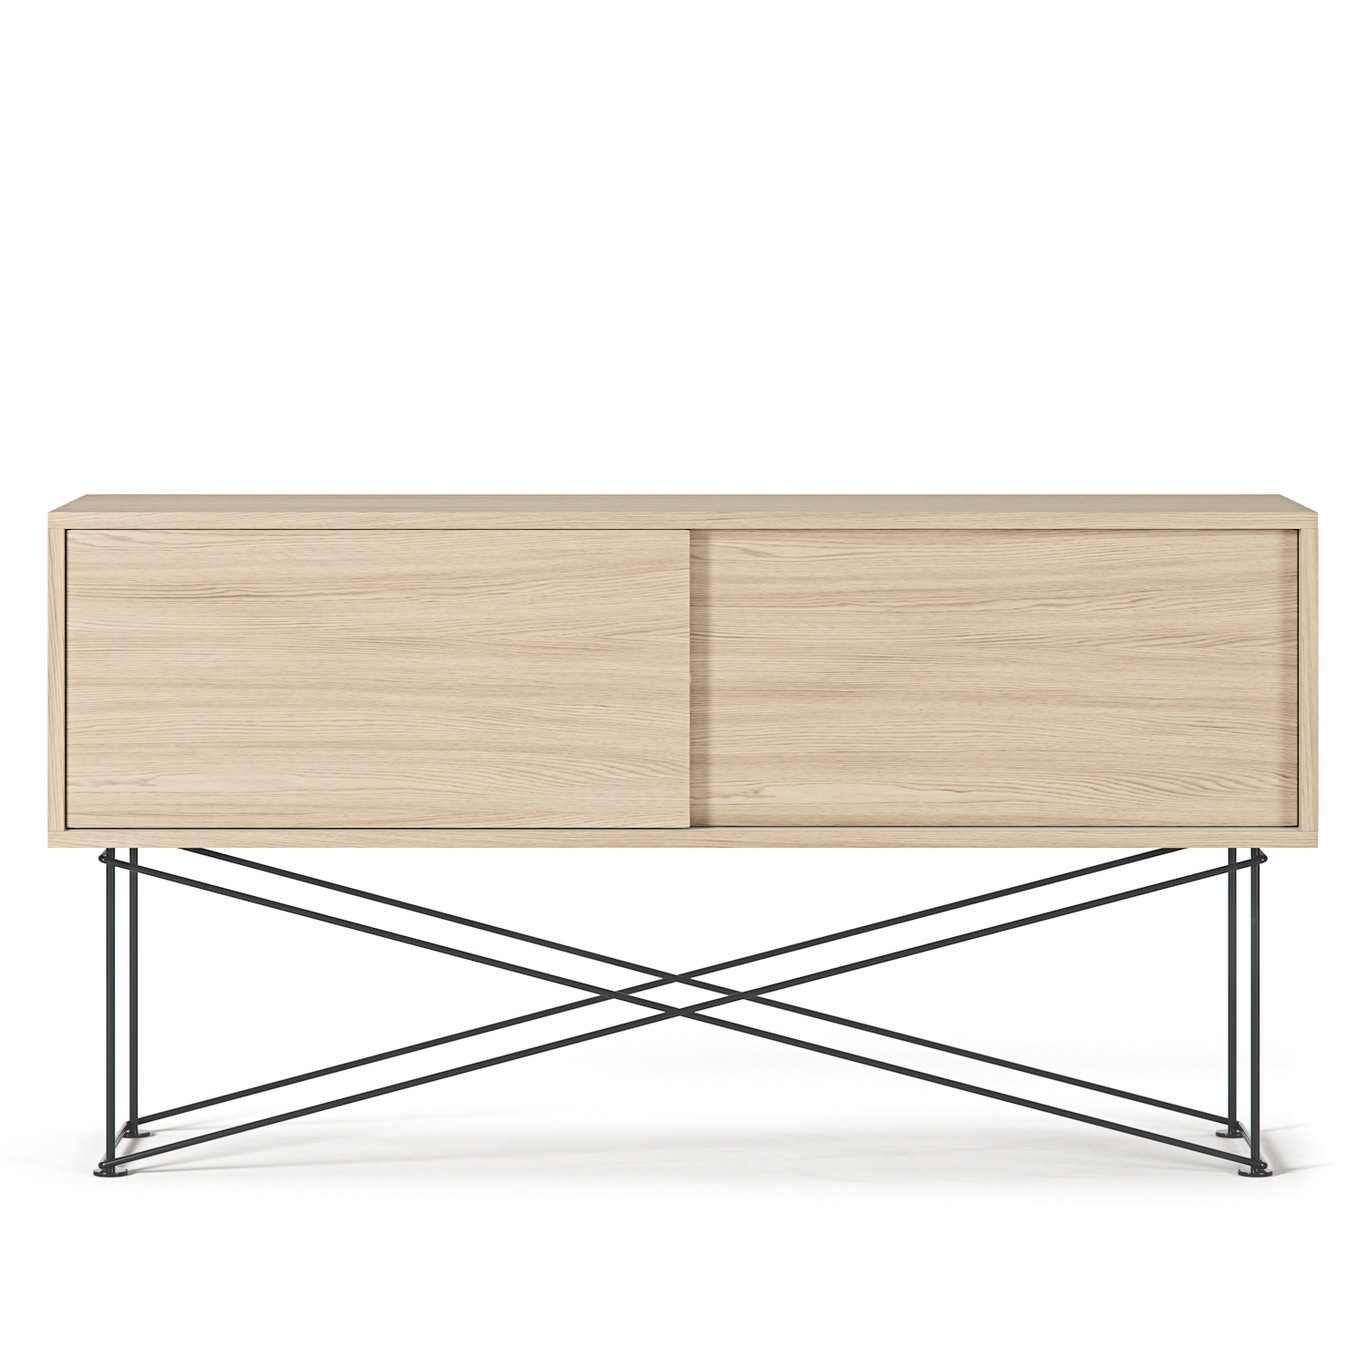 Vogue Media Bench With Stand 136 cm, White Oak / Black